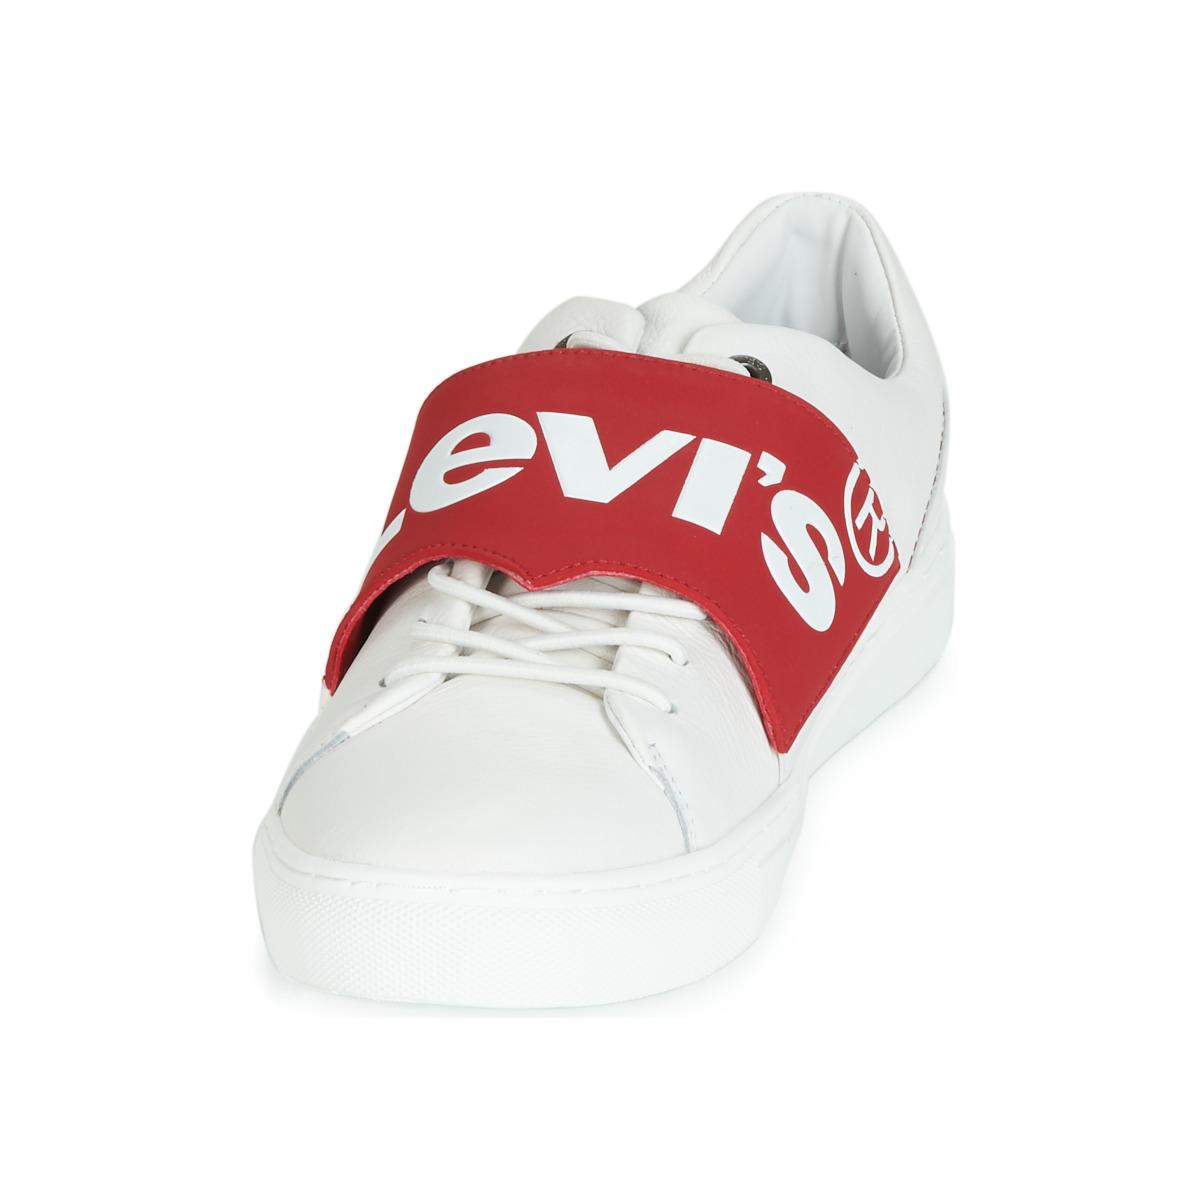 Levi's Batwing Sneaker Shoes (trainers 